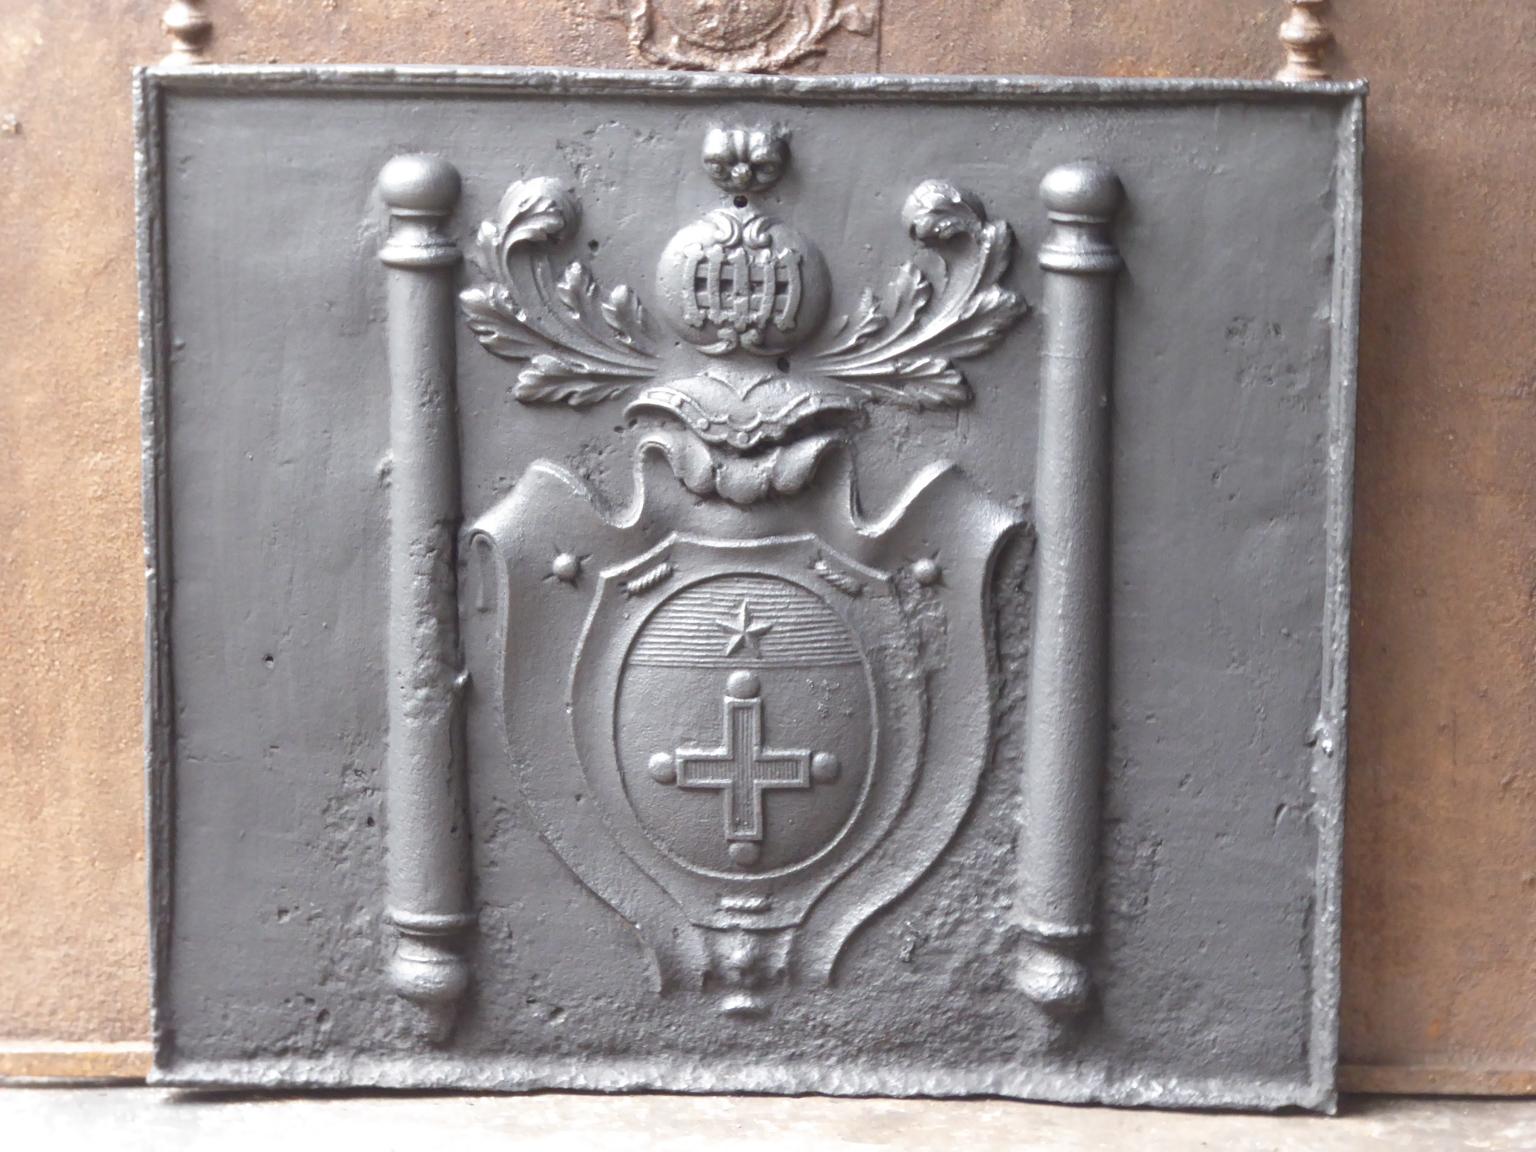 17th-18th century French Louis XIV fireback with an unknown coat of arms and two pillars of Hercules. The pillars of Hercules stand for strength and the unknown. The fireback is made of cast iron and has black / pewter patina. It is in a good